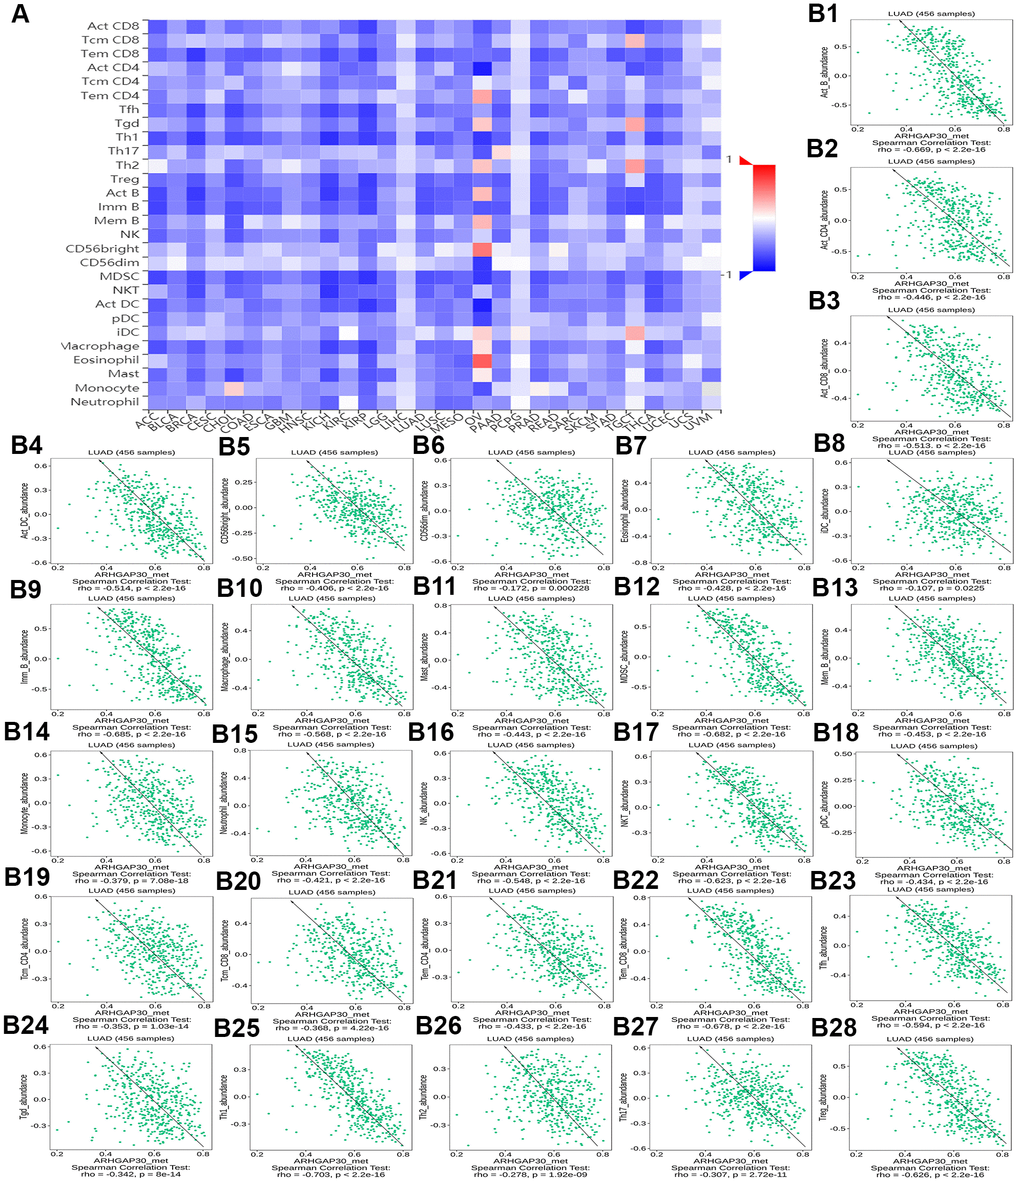 The correlation between the DNA methylation of ARHGAP30 and Immunostimulators. (A) Heat map of Spearman correlations between DNA methylation of ARHGAP30 and immunostimulators across human cancers. (B1–B28) Scatter plots showing the negative correlation between DNA methylation of ARHGAP30 and immunostimulators in the treatment of lung adenocarcinoma.